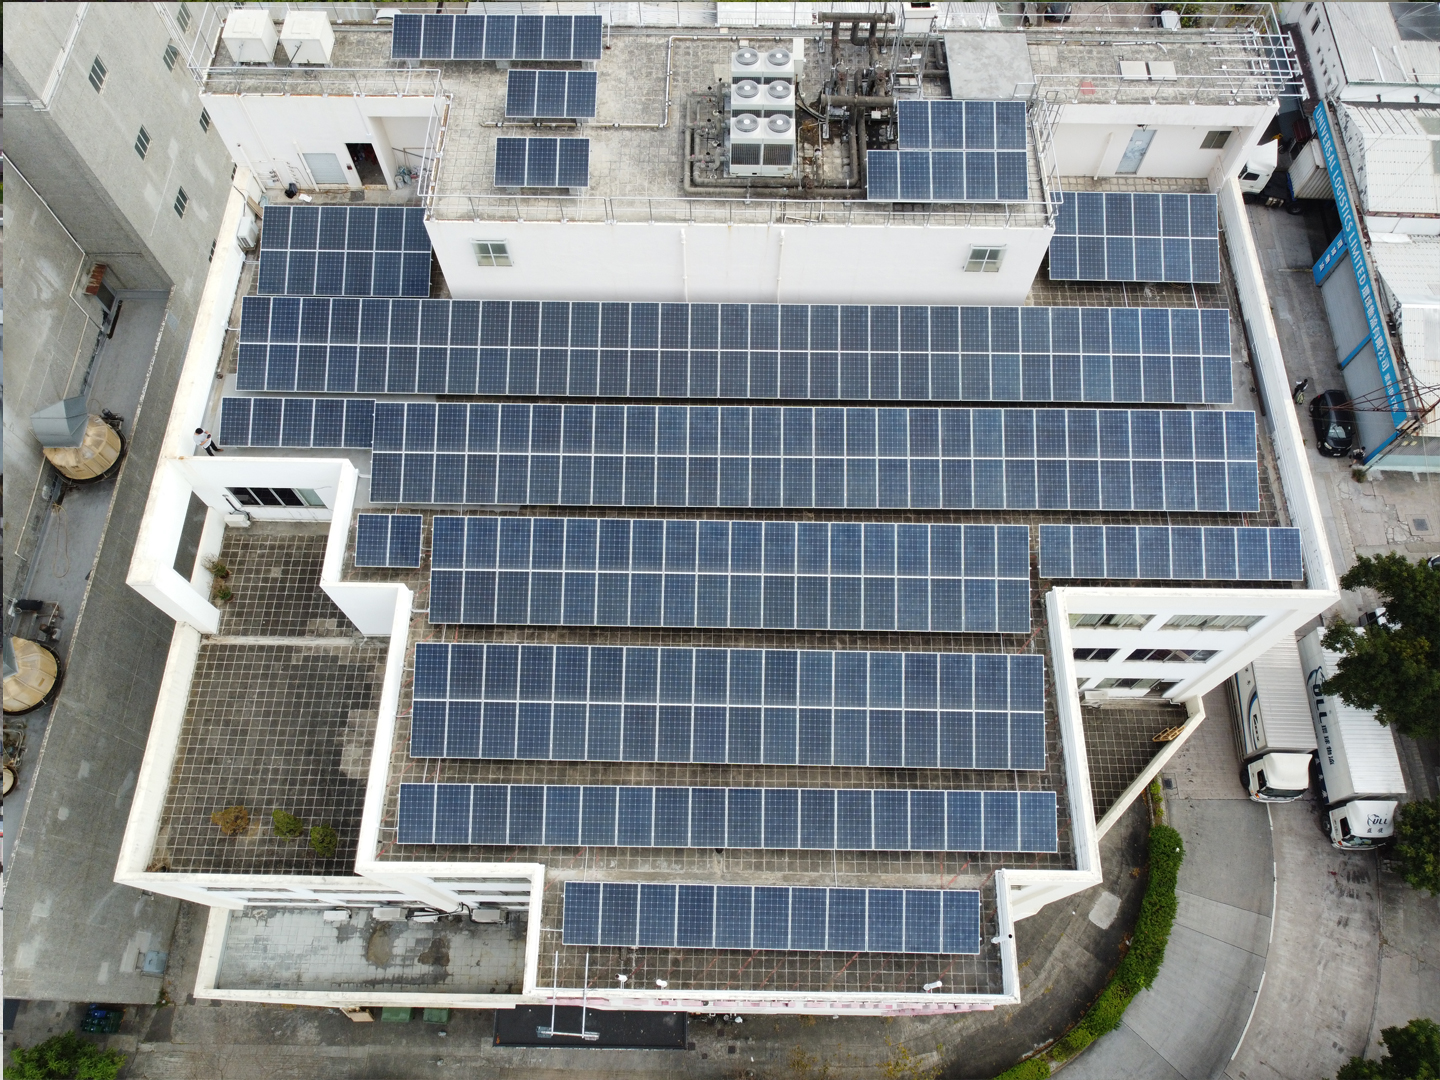 The 100 kW solar system on a industry building roof